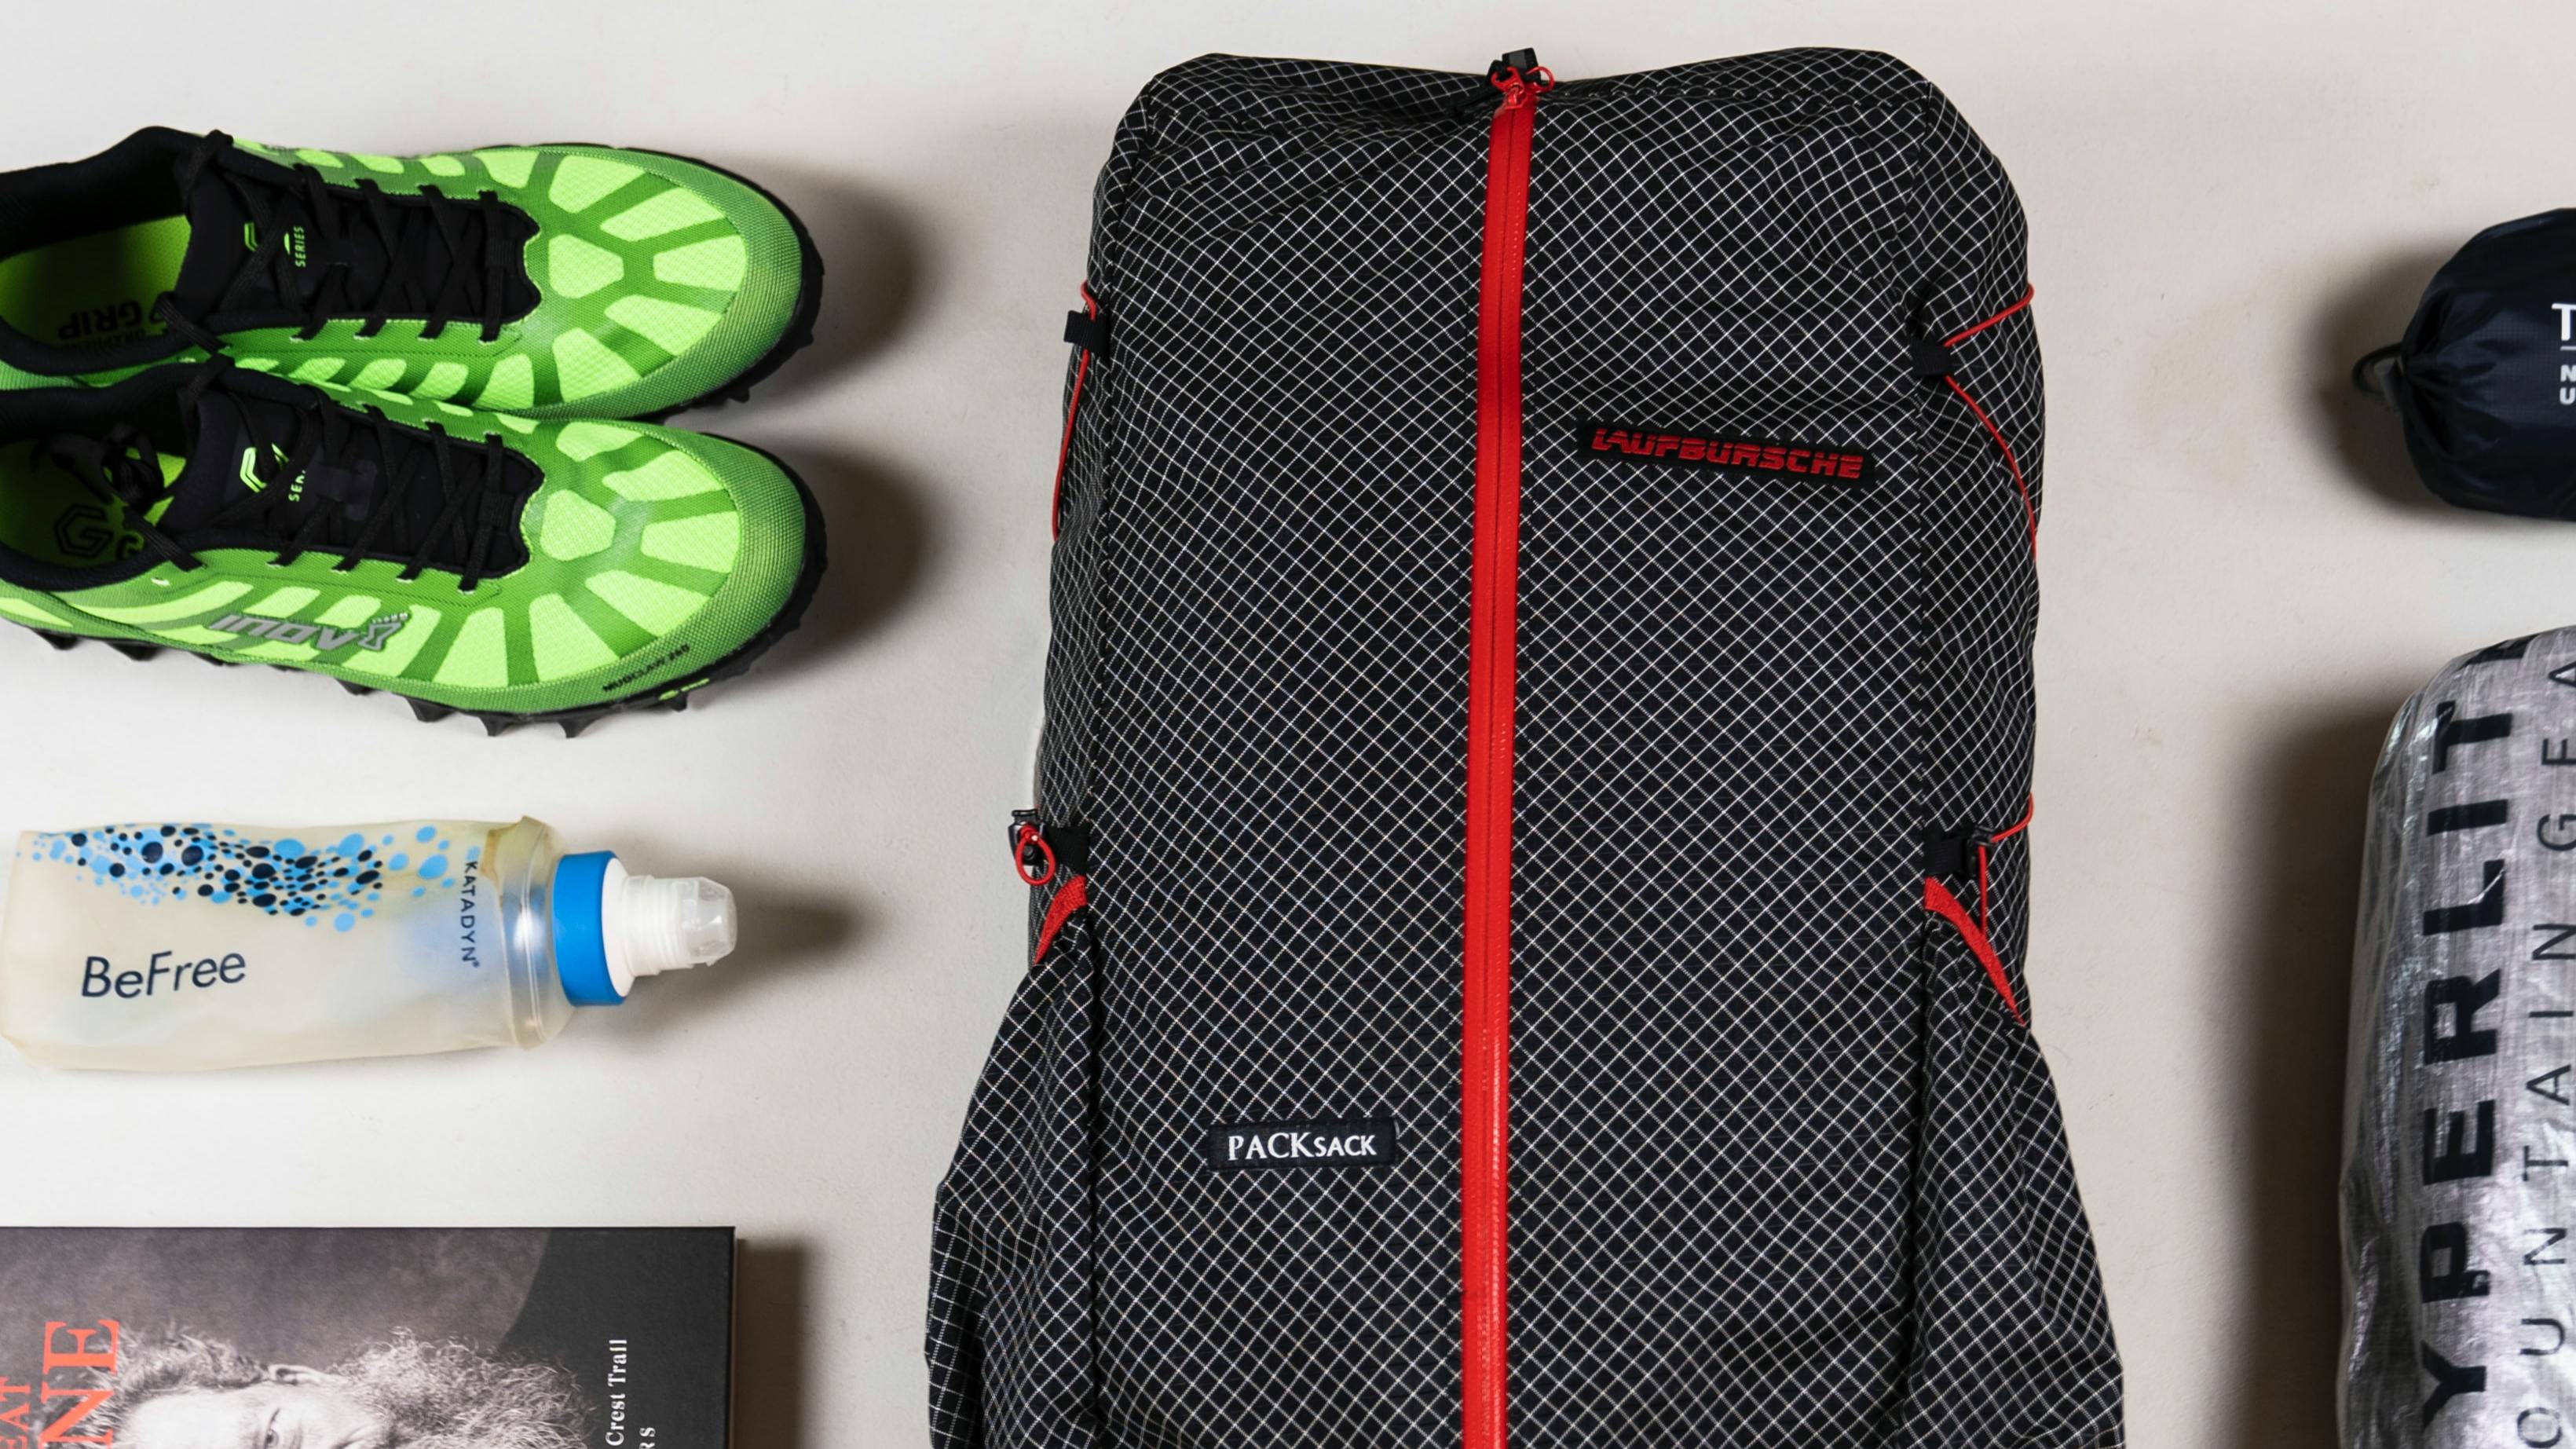 Camping gear for an ultralight camping trip